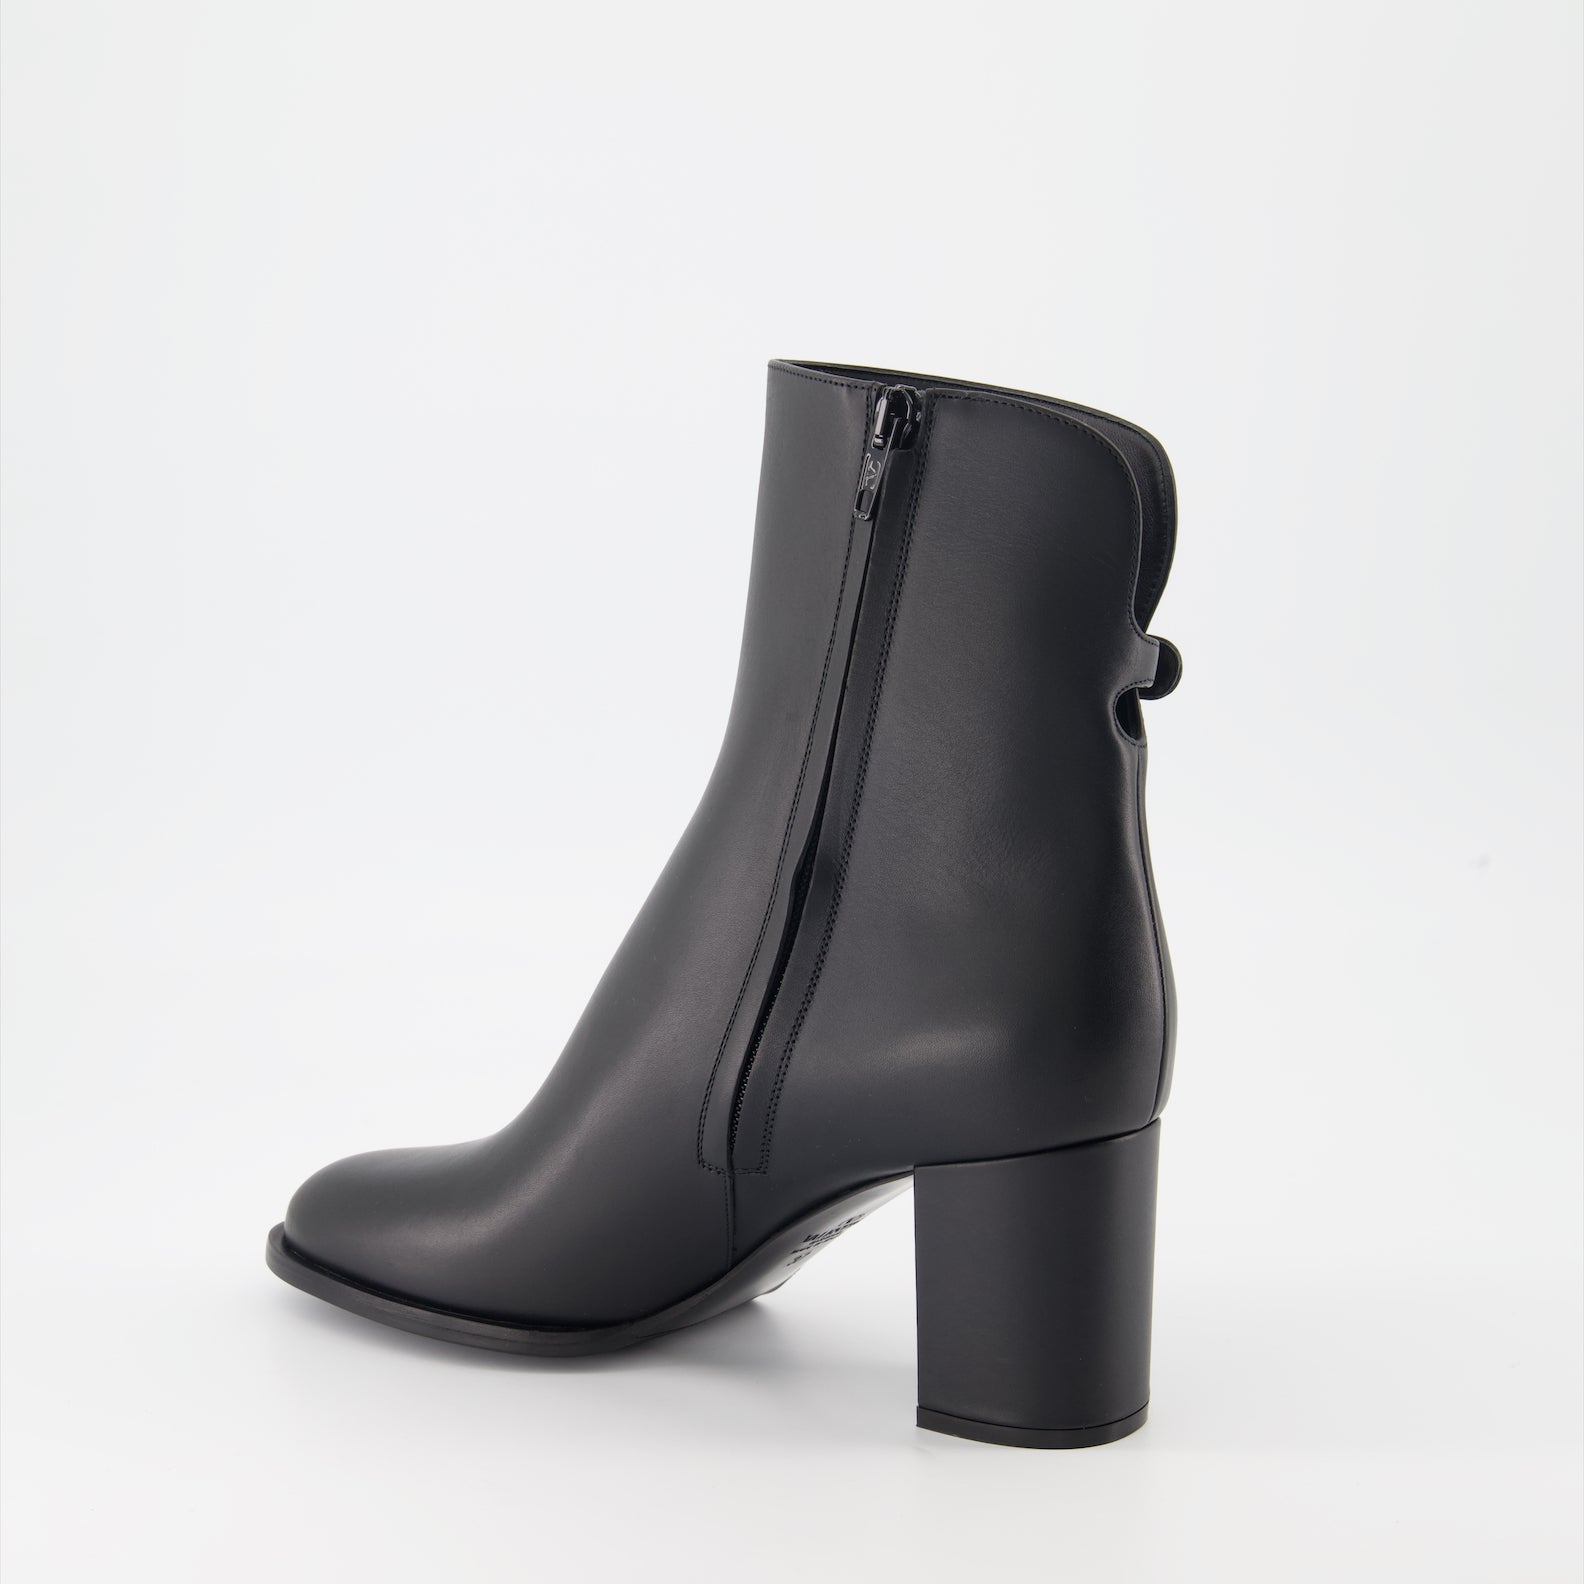 VLogo leather ankle boots